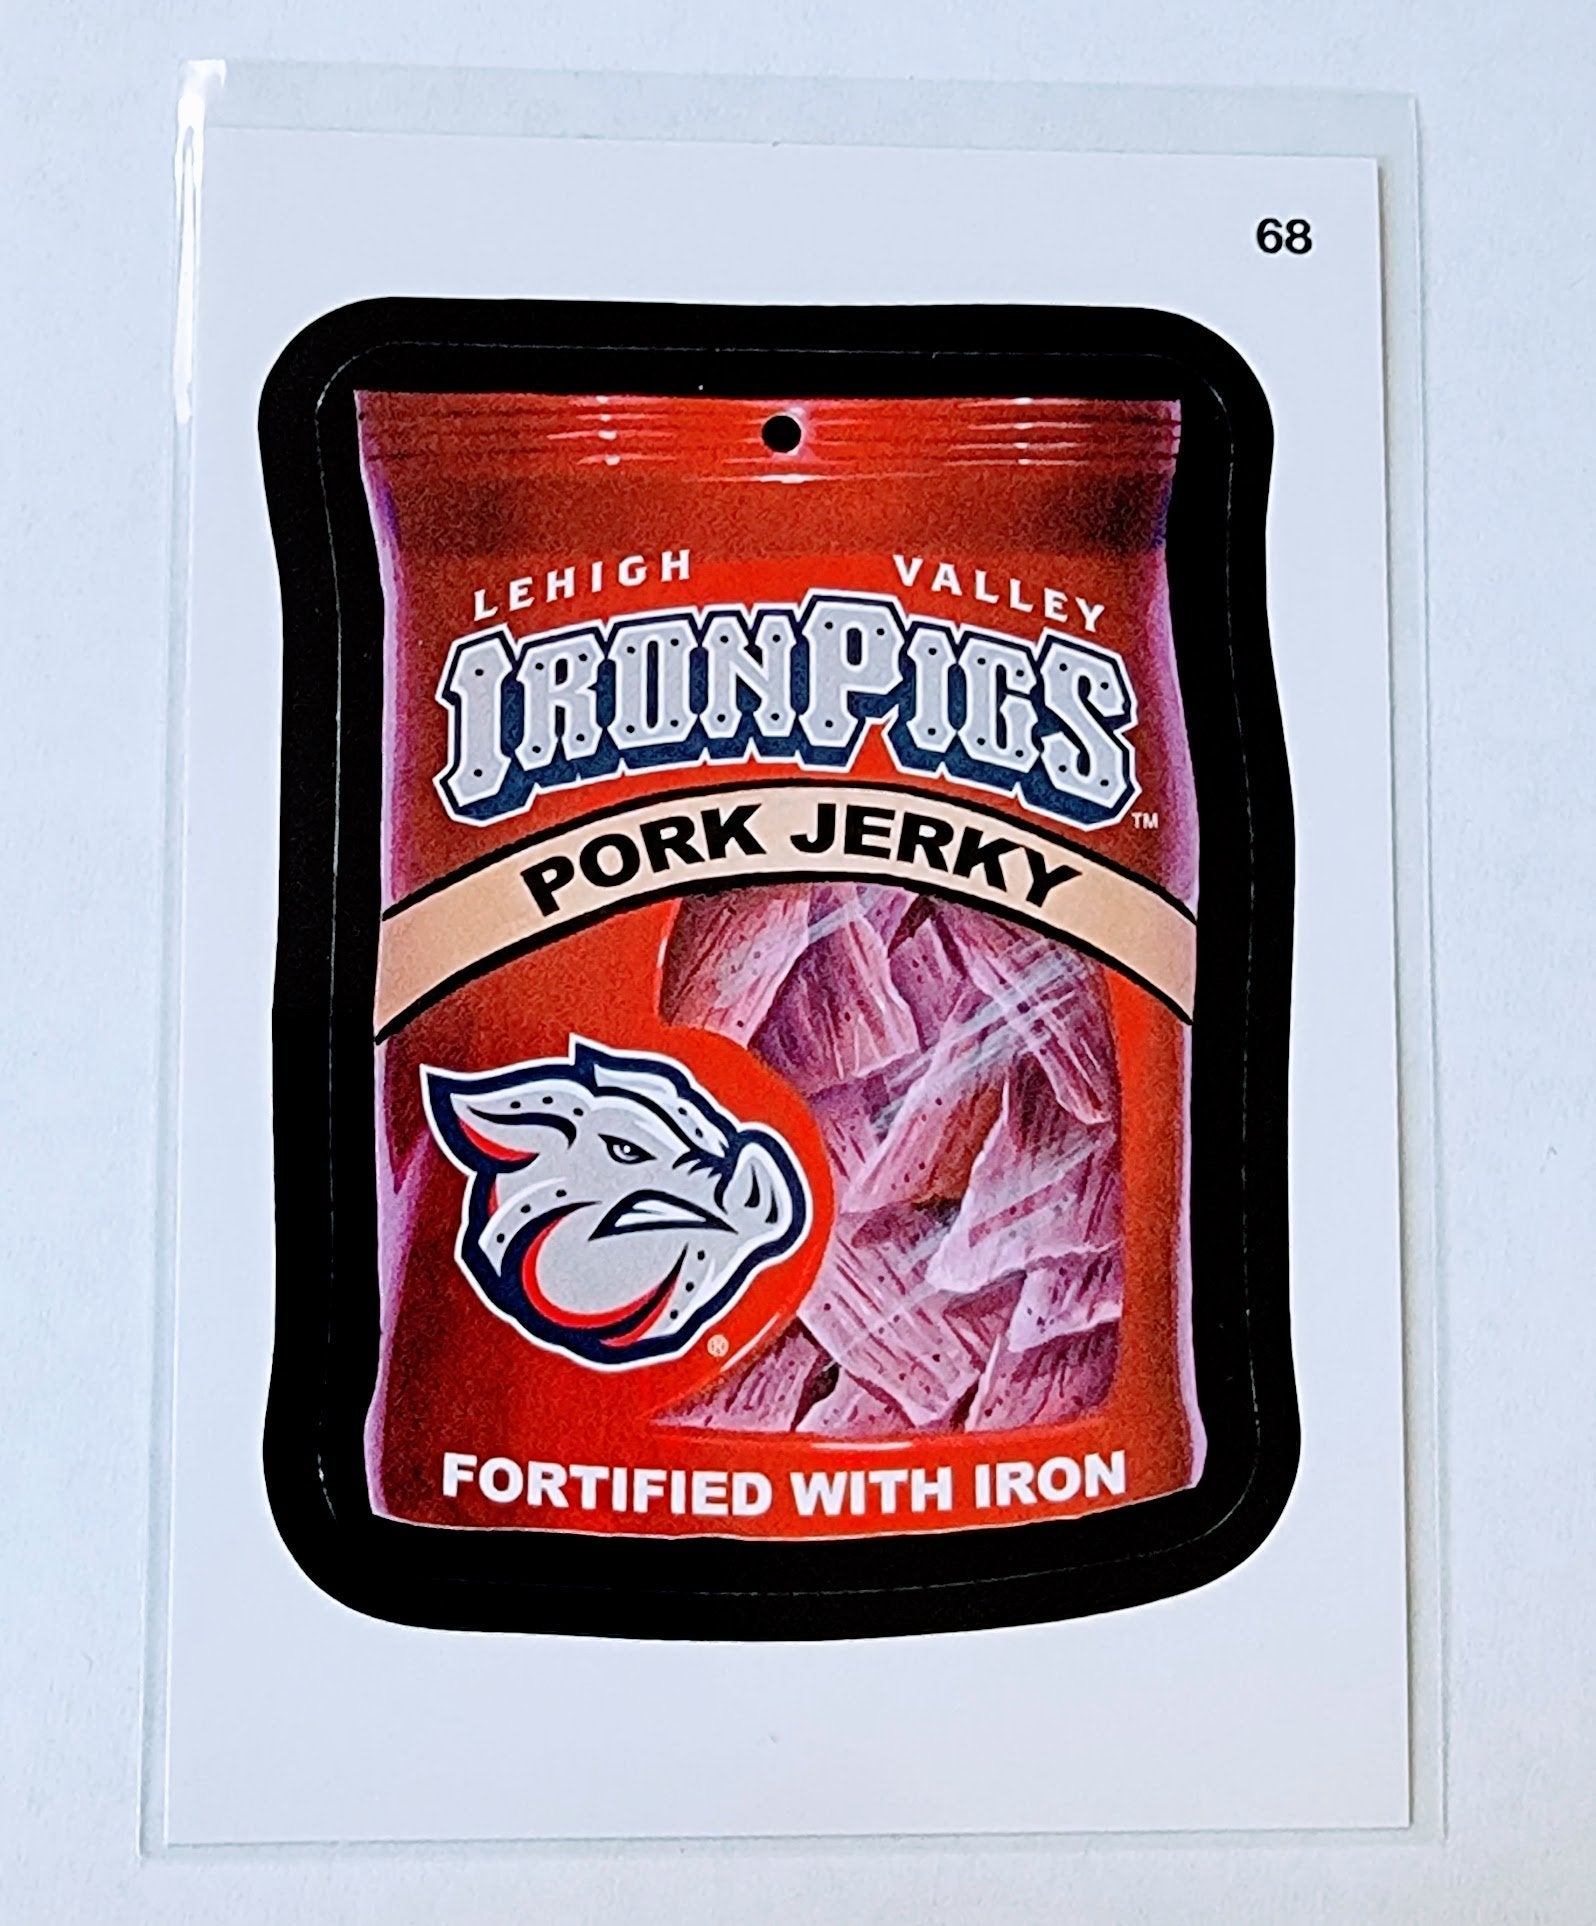 2016 Topps MLB Baseball Wacky Packages Iron Pigs Pork Jerky Sticker Trading Card MCSC1 simple Xclusive Collectibles   